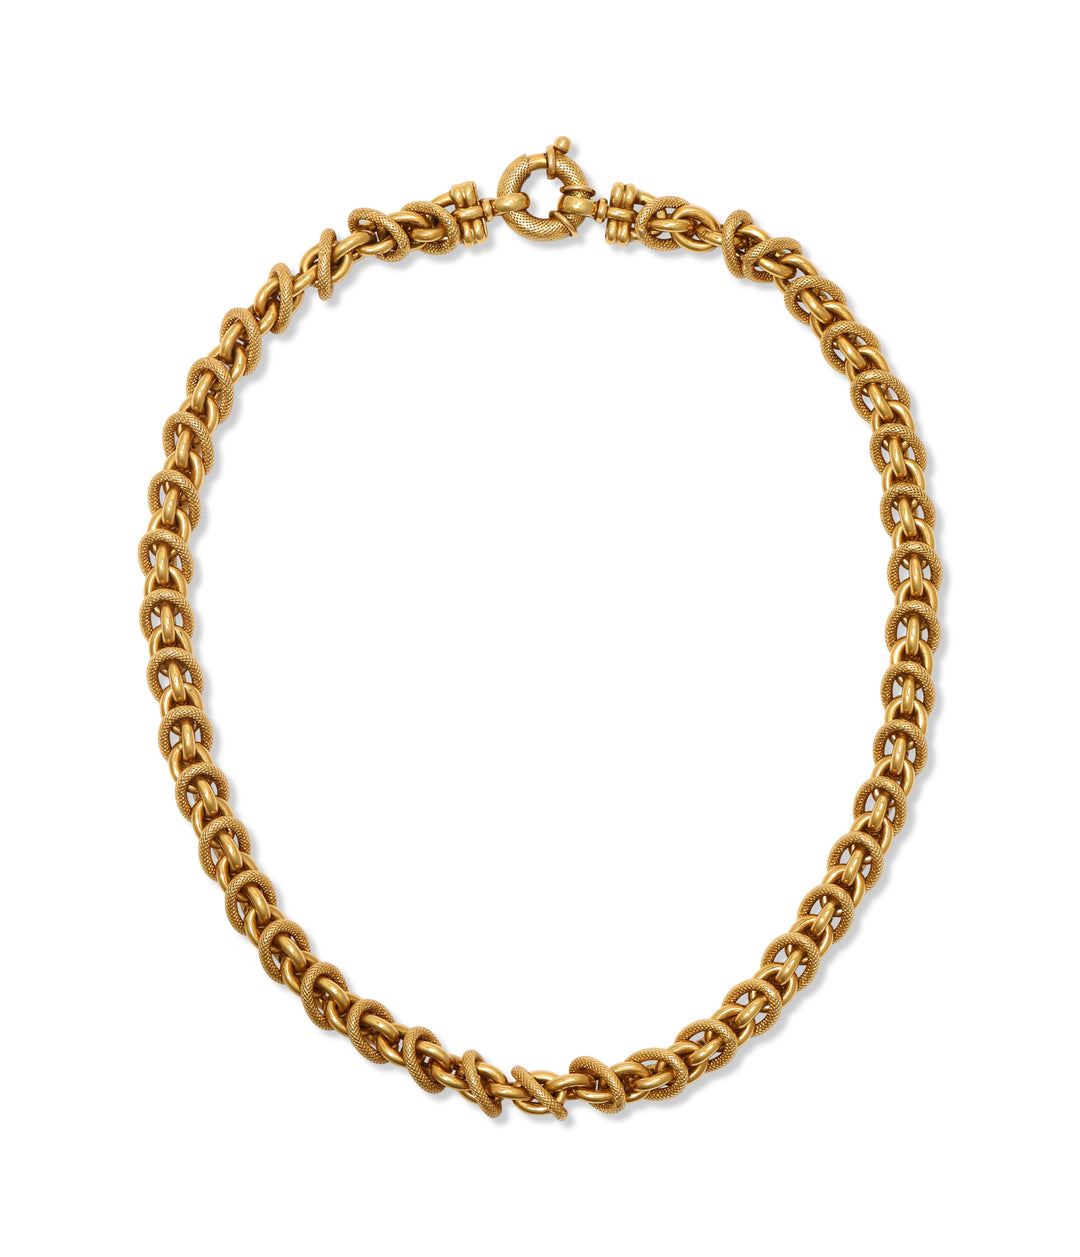 Textured Chain Necklace in 18K gold